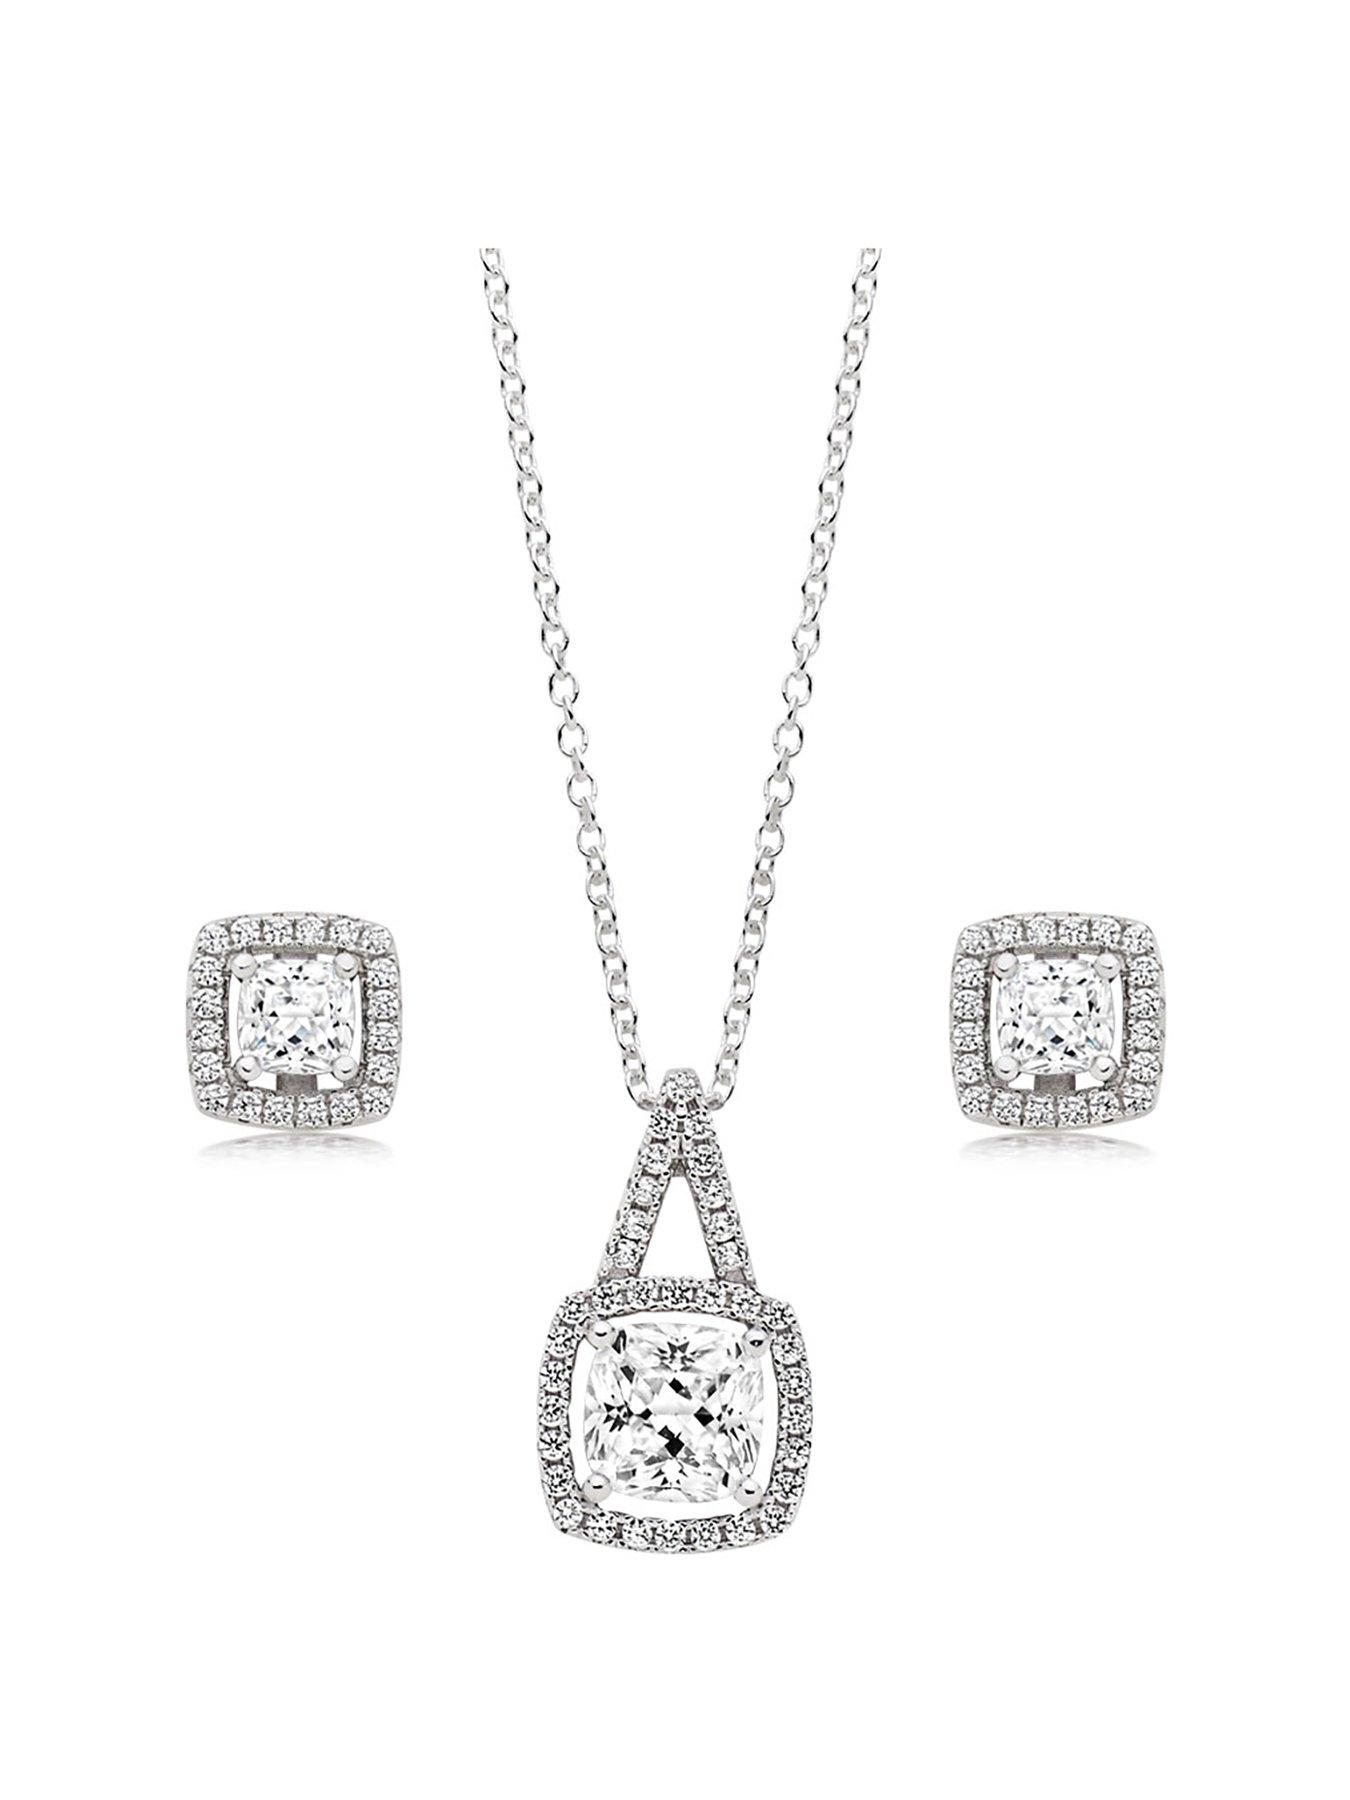 Jewellery & watches Silver Cubic Zirconia Square Halo Pendant and Earrings Set